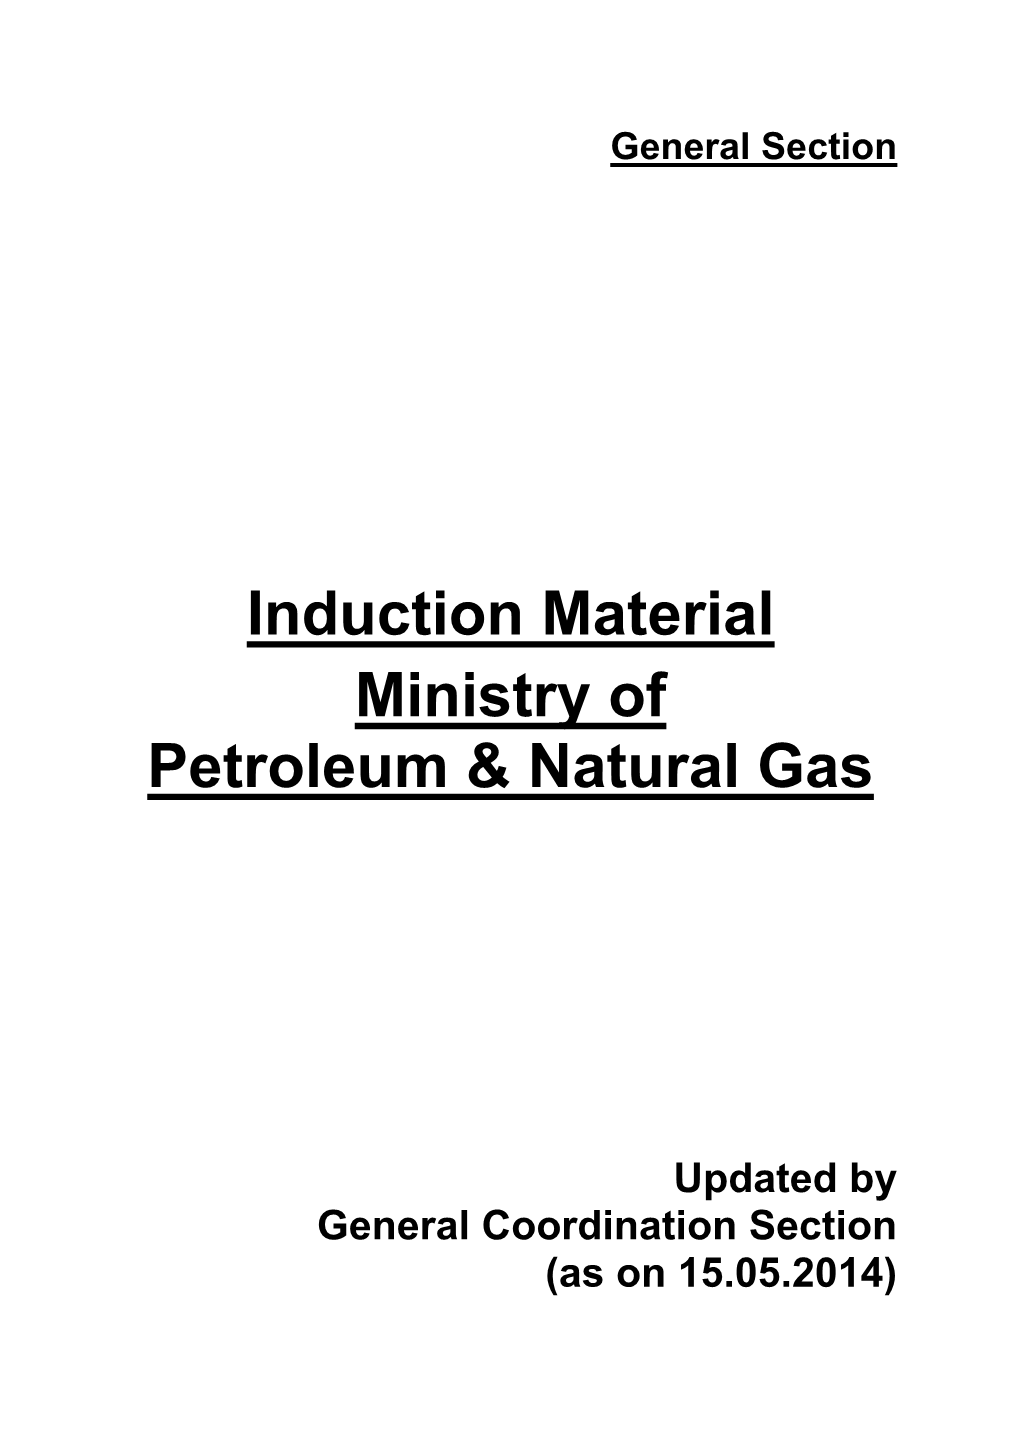 Induction Material Ministry of Petroleum & Natural